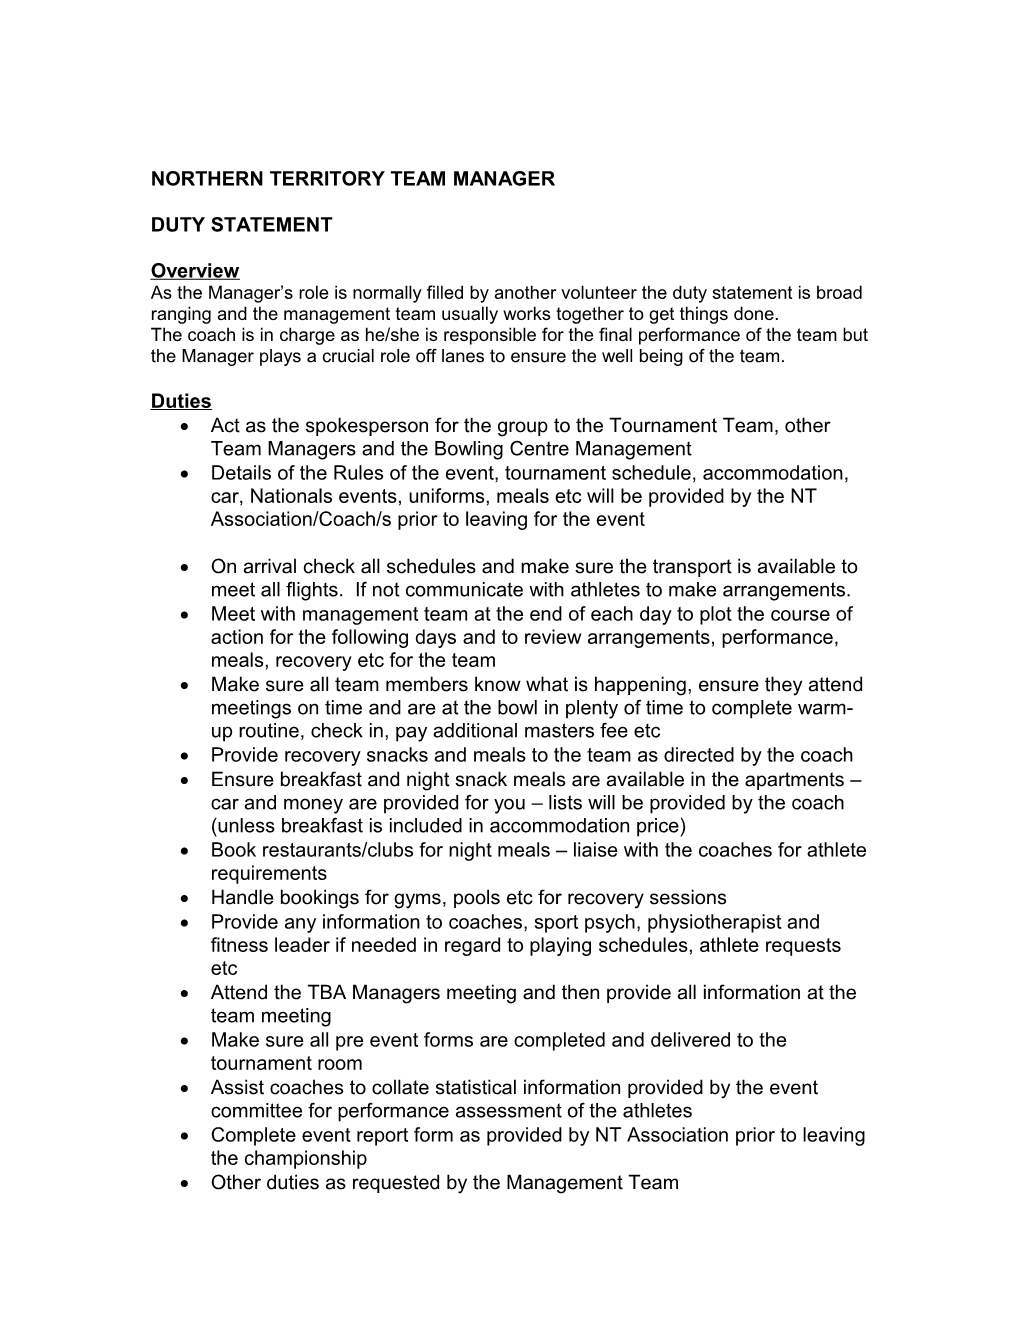 Northern Territory Team Manager